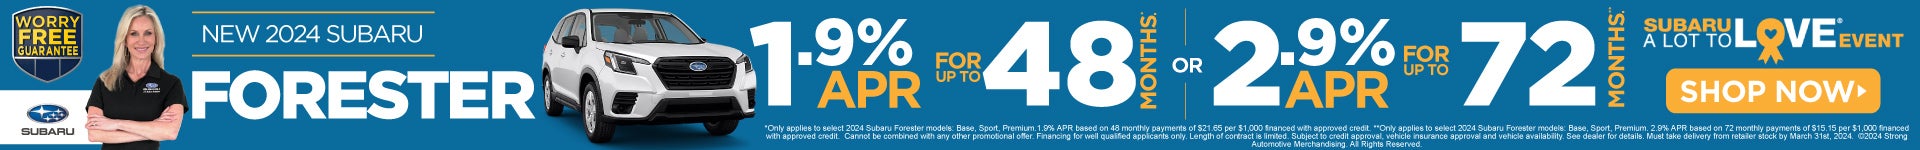 New 2024 Subaru Forester 1.9% APR or 2.9% APR* - Shop Now